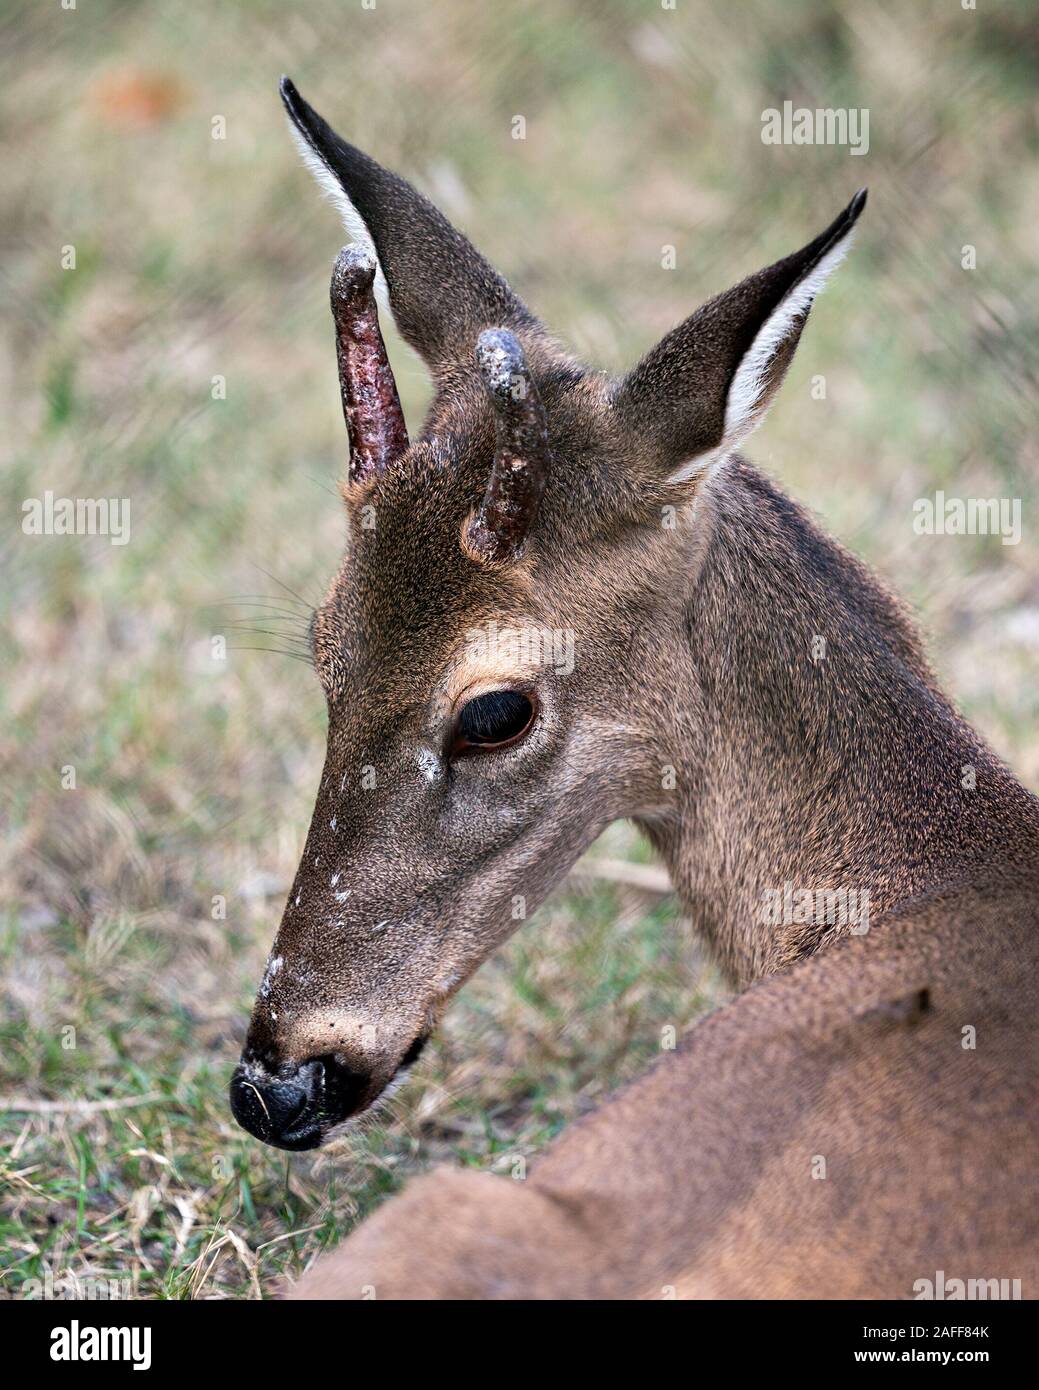 Deer animal White-tailed dear head close-up profile view with bokeh background displaying head, antlers, ears, eye, mouth, nose, brown fur in its surr Stock Photo